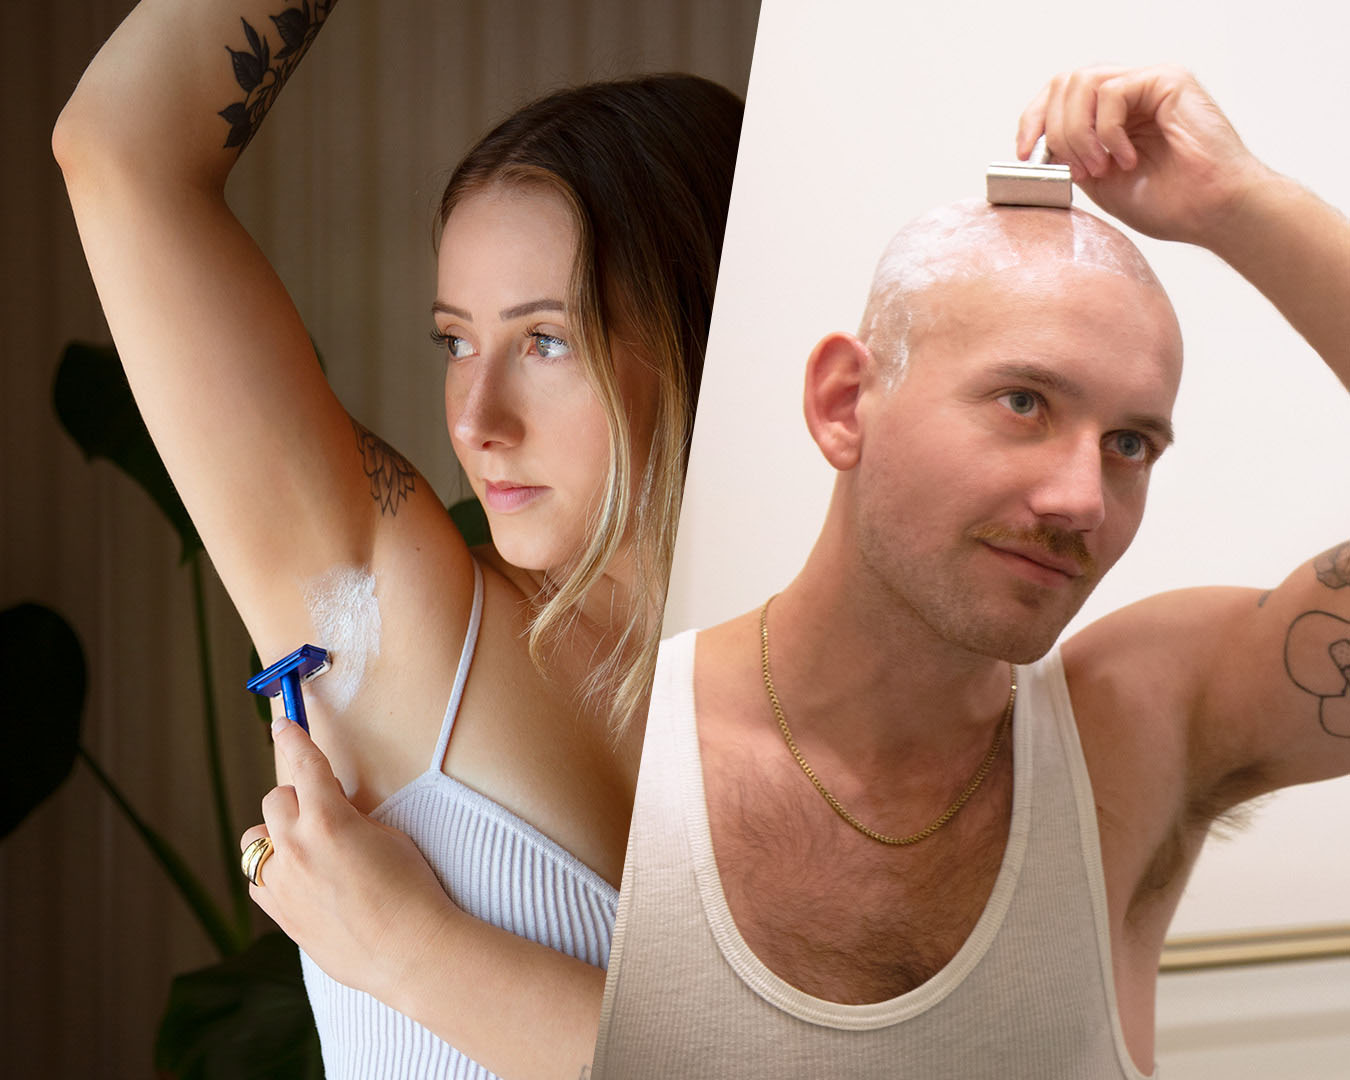 A woman wet shaving her underarm and a man wet shaving his head.